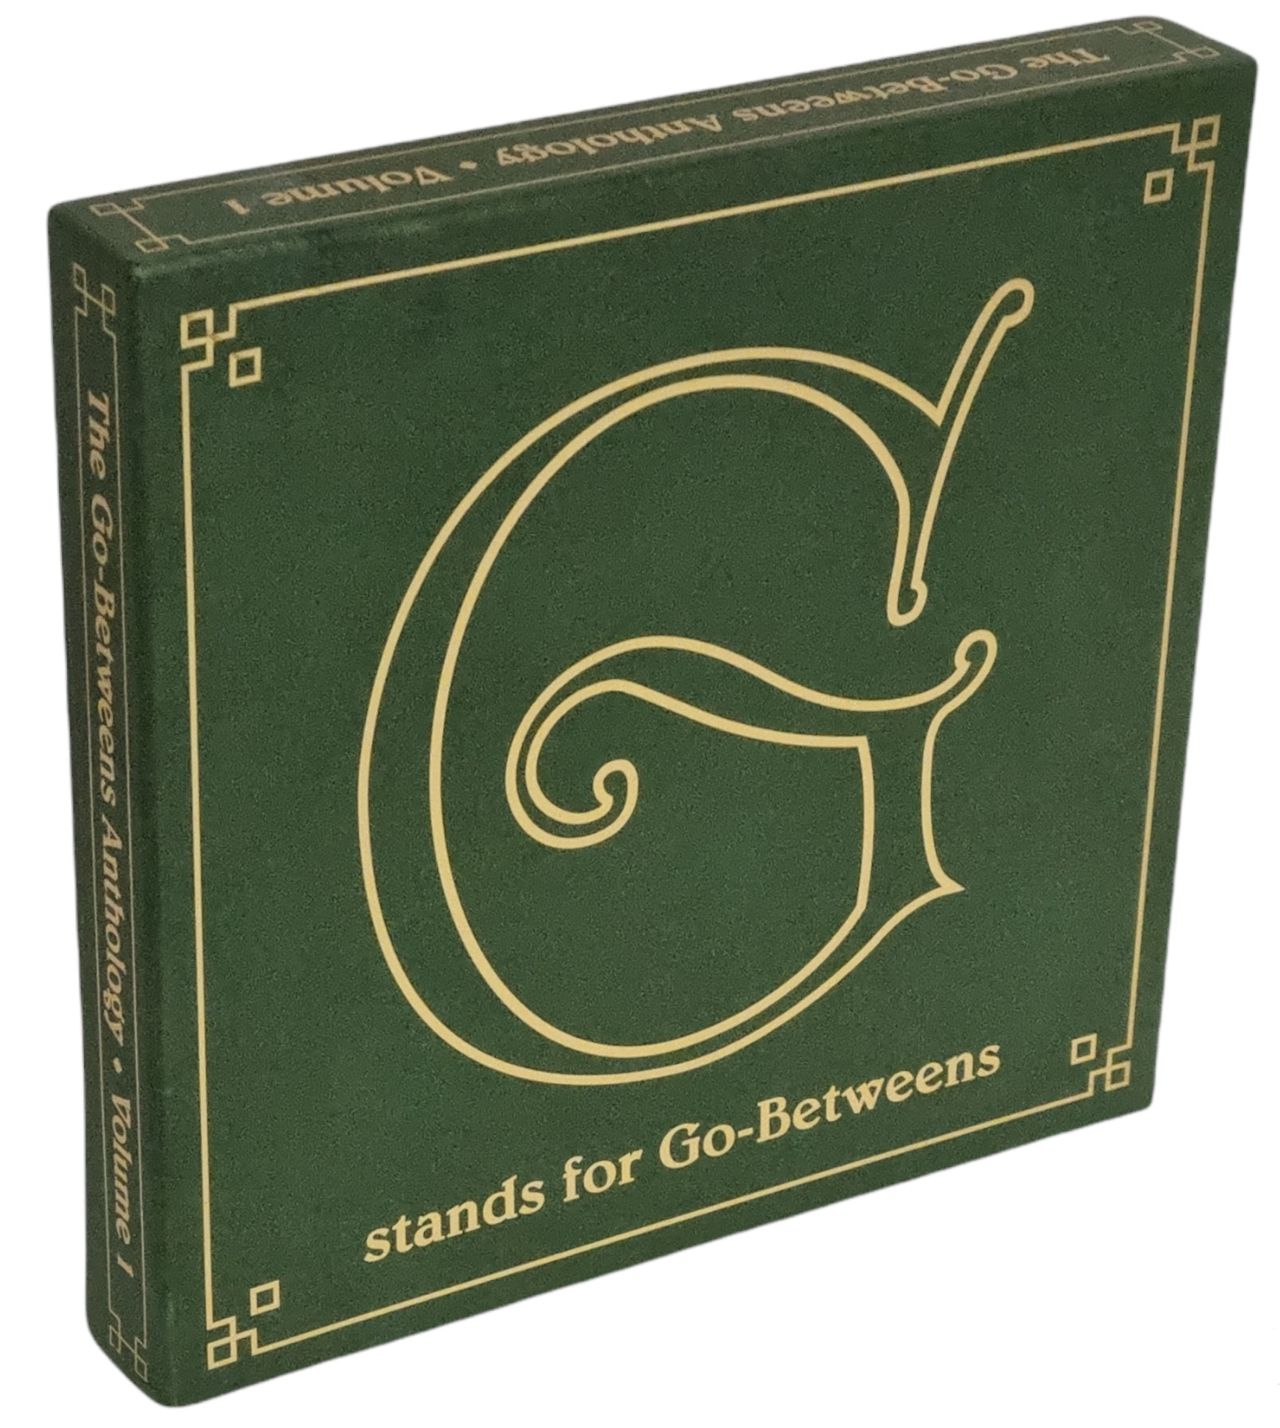 Go-Betweens G Stands For Go-Betweens: The Go-Betweens Anthology Volume 1 UK box set TGBBXGS784855